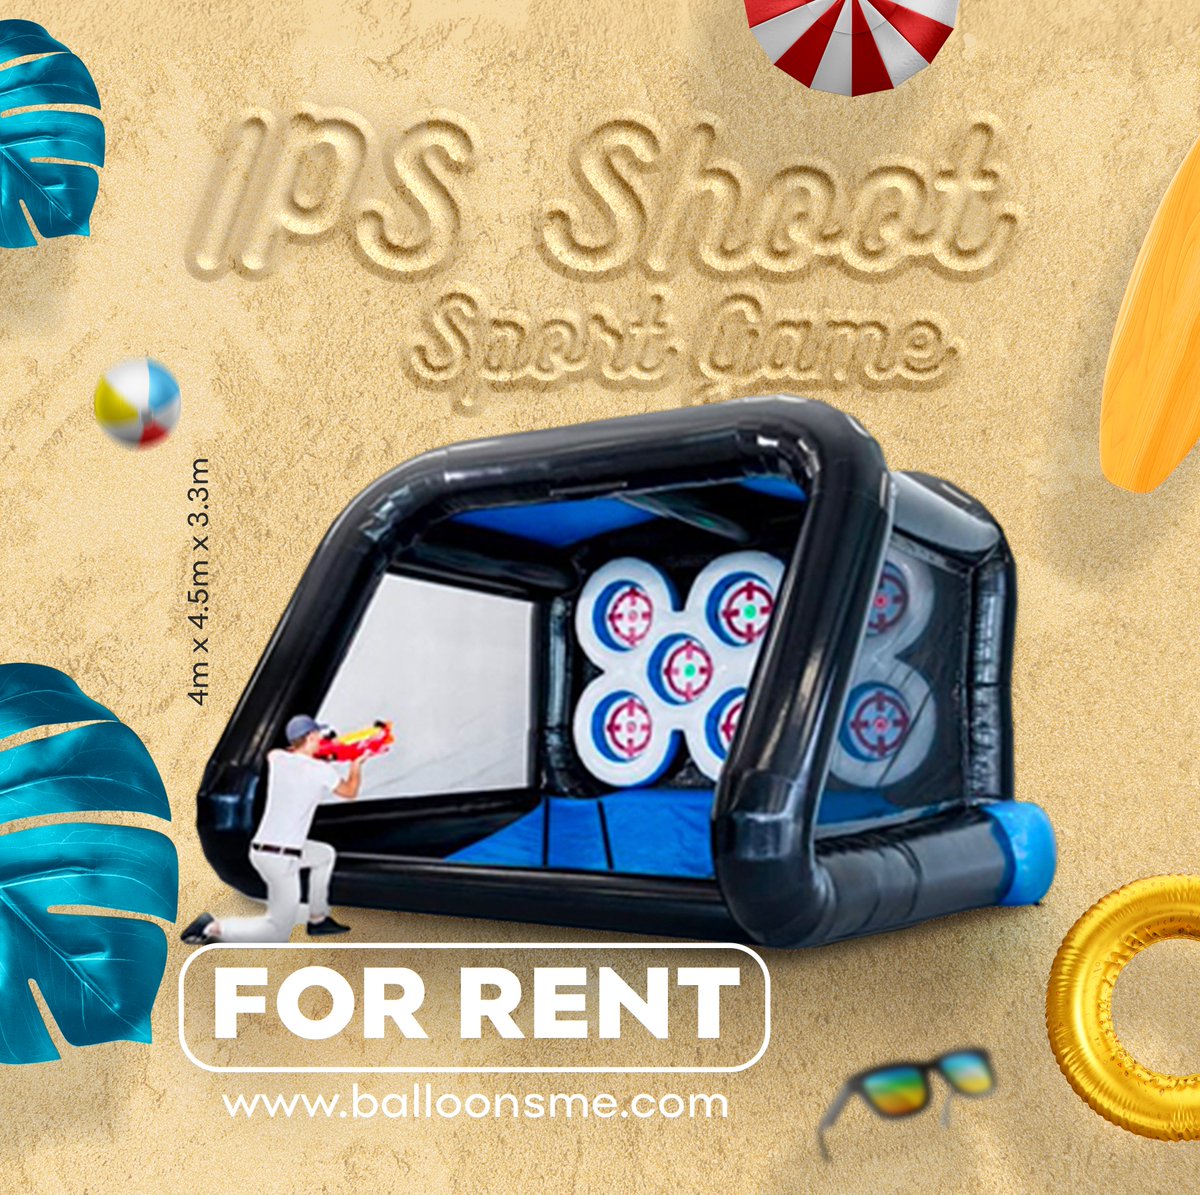 Jump into endless fun this summer with our IPS Shoot Sport Game
! Perfect for kids and adults alike.

balloonsme.com

#inflatables #games #events #kidsactivities #bouncingcastle #eventactivities #summergames #summersale #summer #funtime #rentalitems #abudhabi